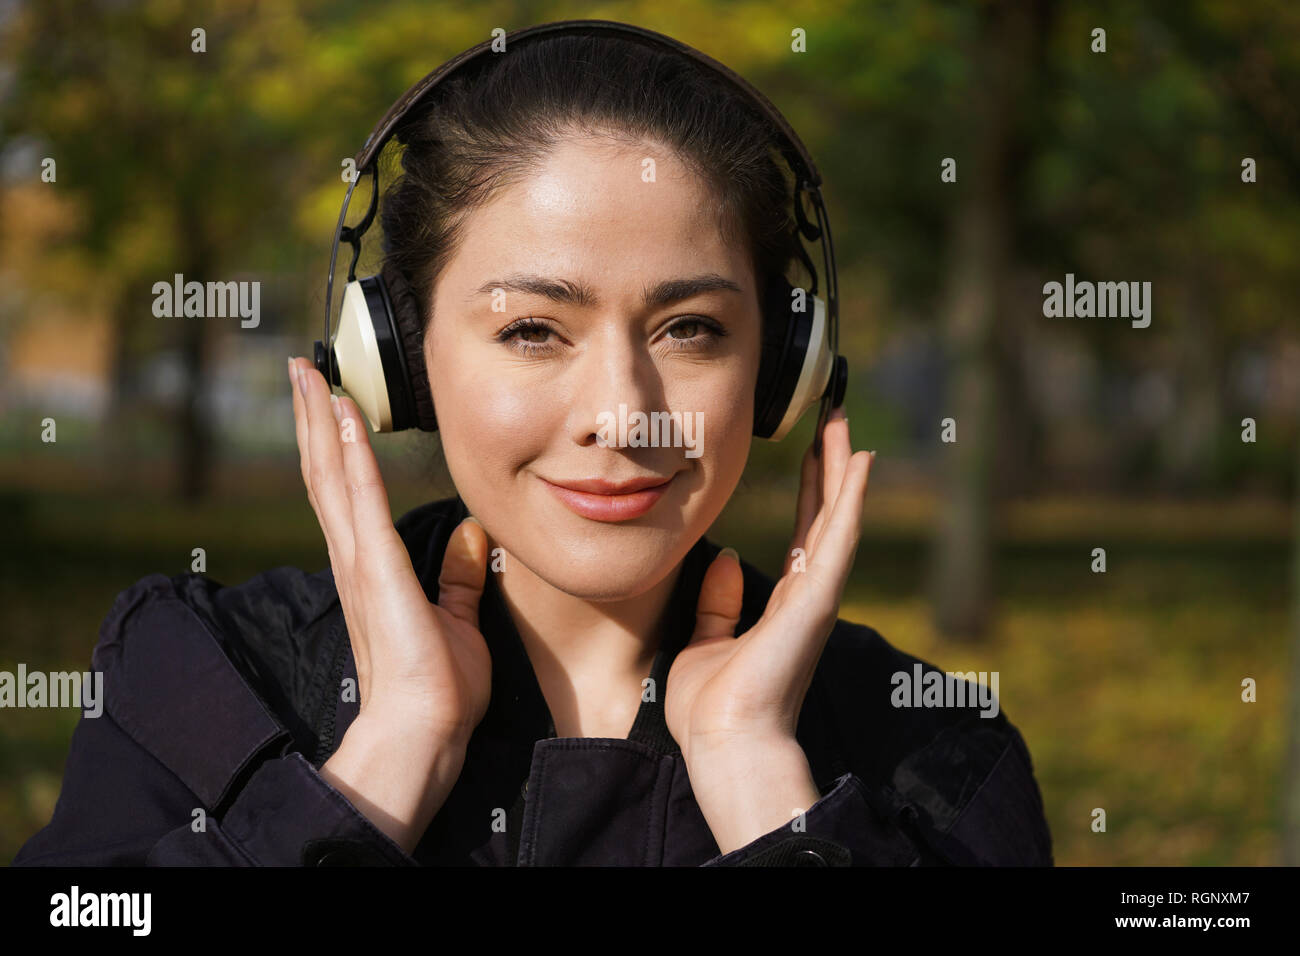 young woman listening to music with cordless headphones outside Stock Photo